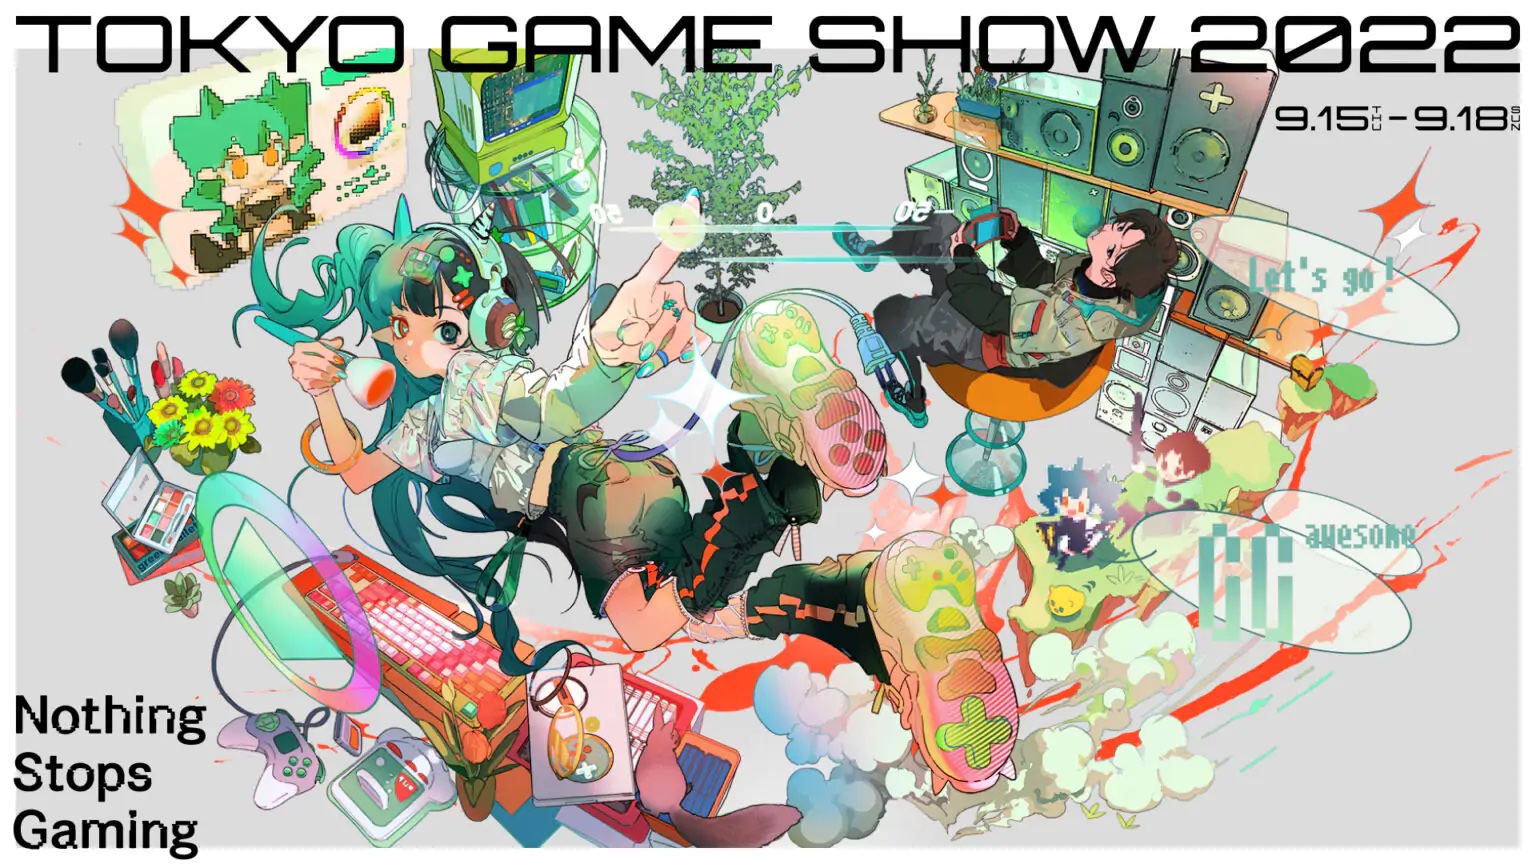 Big in Japan: PatchWorld is in person at the Tokyo Game Show